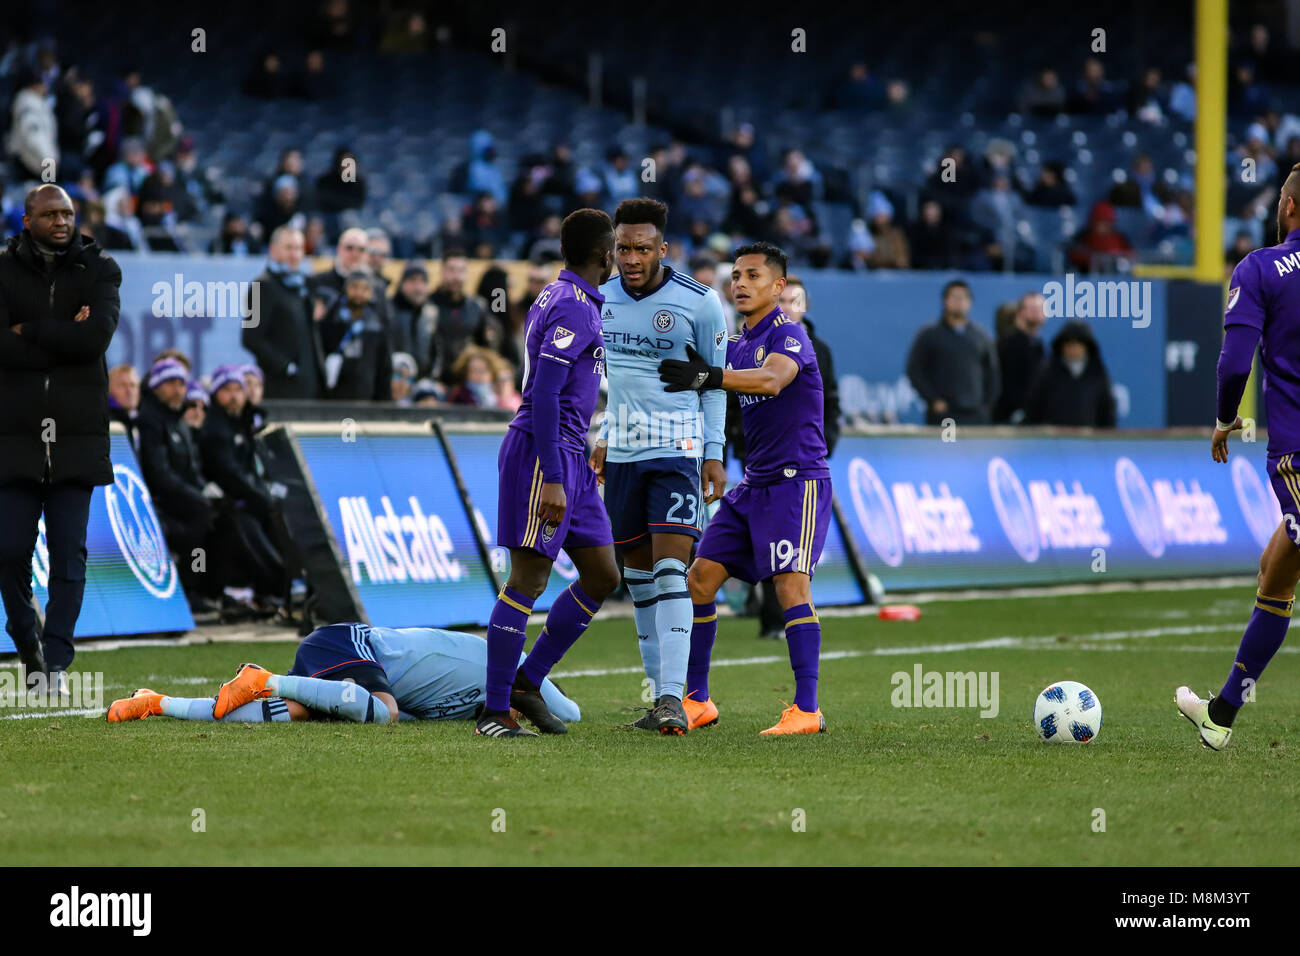 Bronx, NY USA - 17th March 2018 - Rodney Wallace (23) stares down Richie Laryea (6) after his strong tackle on Jesus Medina (19). Laryea picked up a yellow card for the foul. Stock Photo